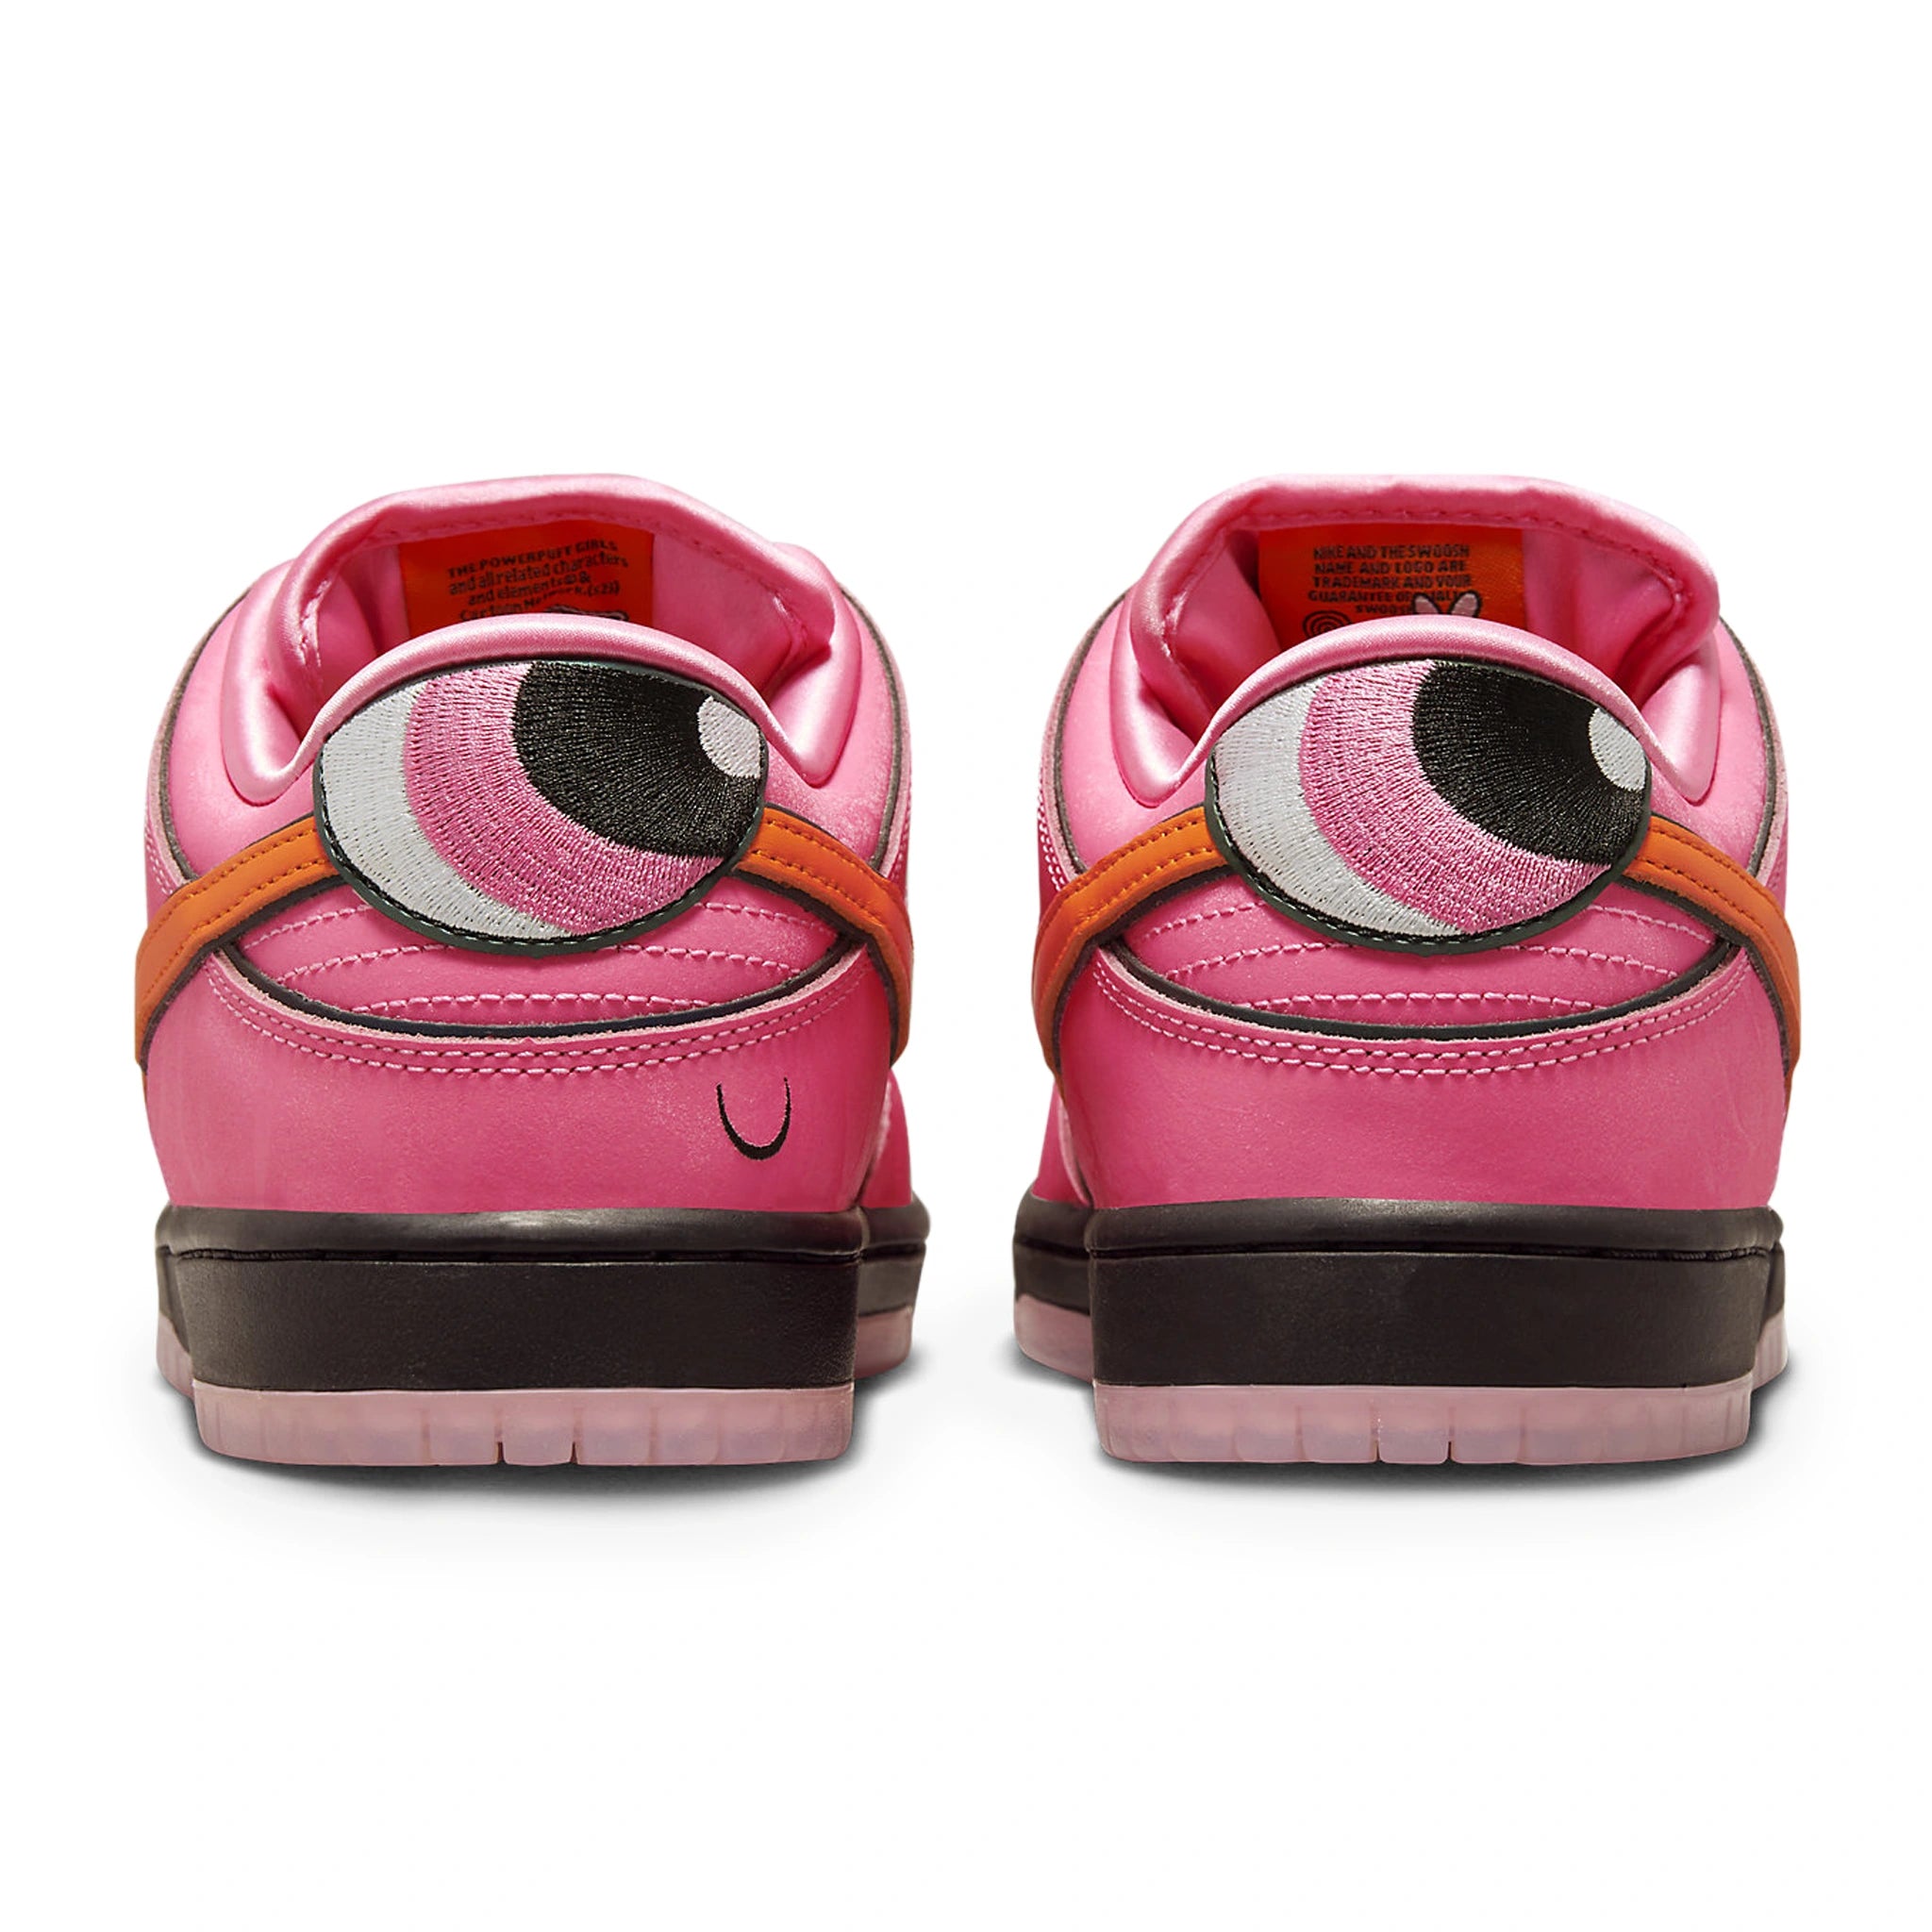 Back view of The Powerpuff Girls x Nike SB Dunk Low Blossom FD2631-600